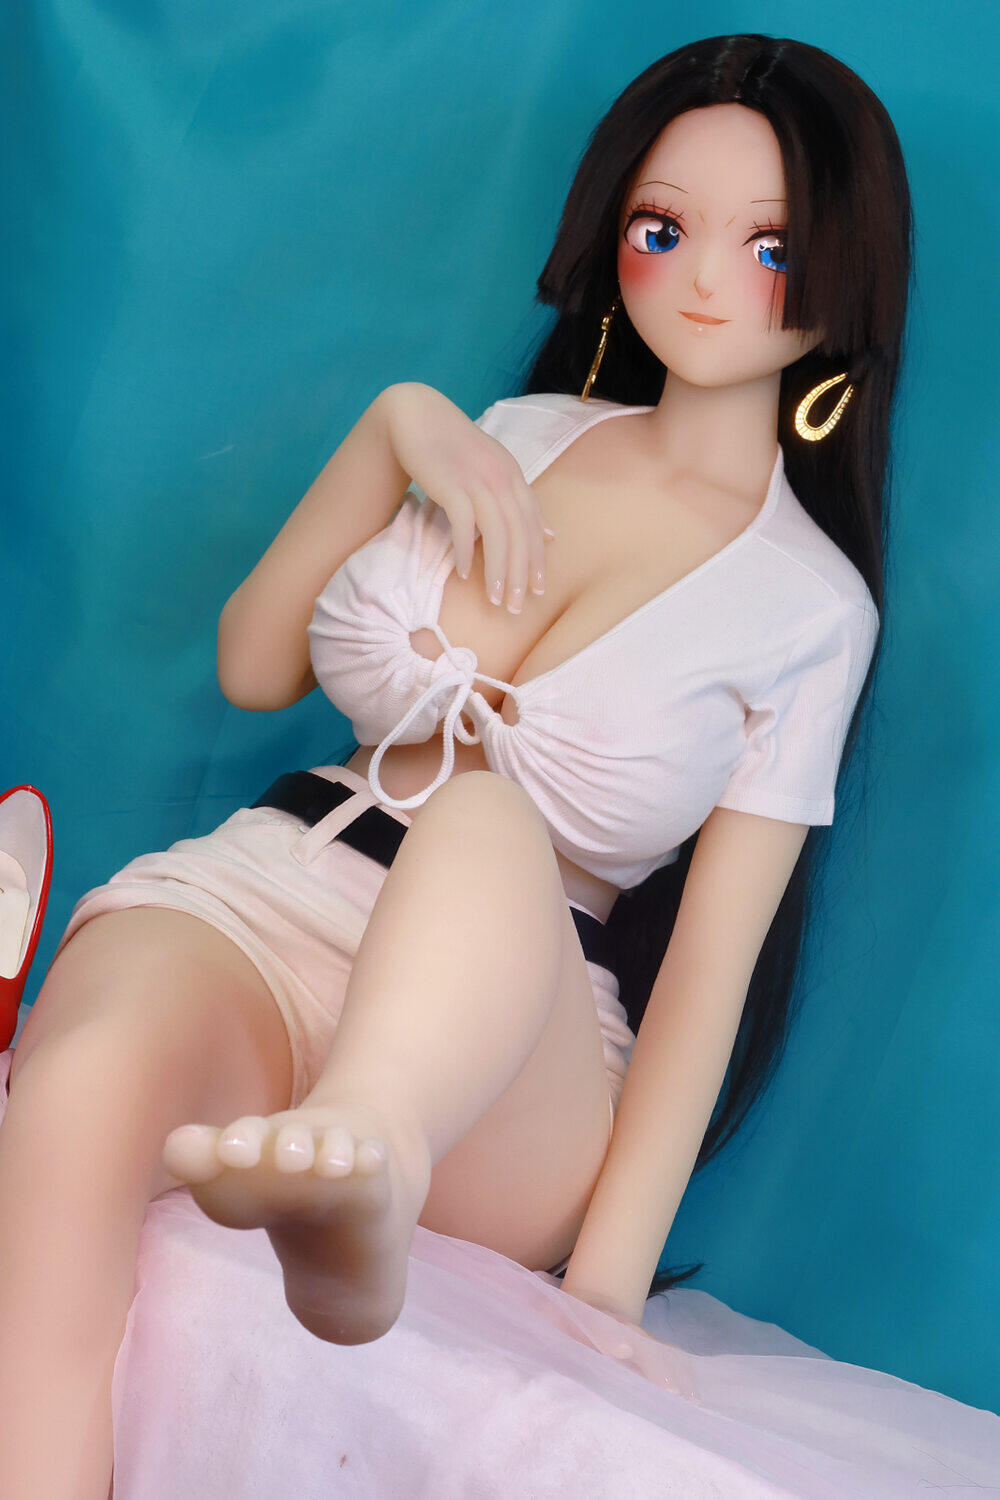 Justice-155cm(5ft1) Aotume Adult Doll H-Cup Normal Skin Tone Big Boobs TPE Dolls image5